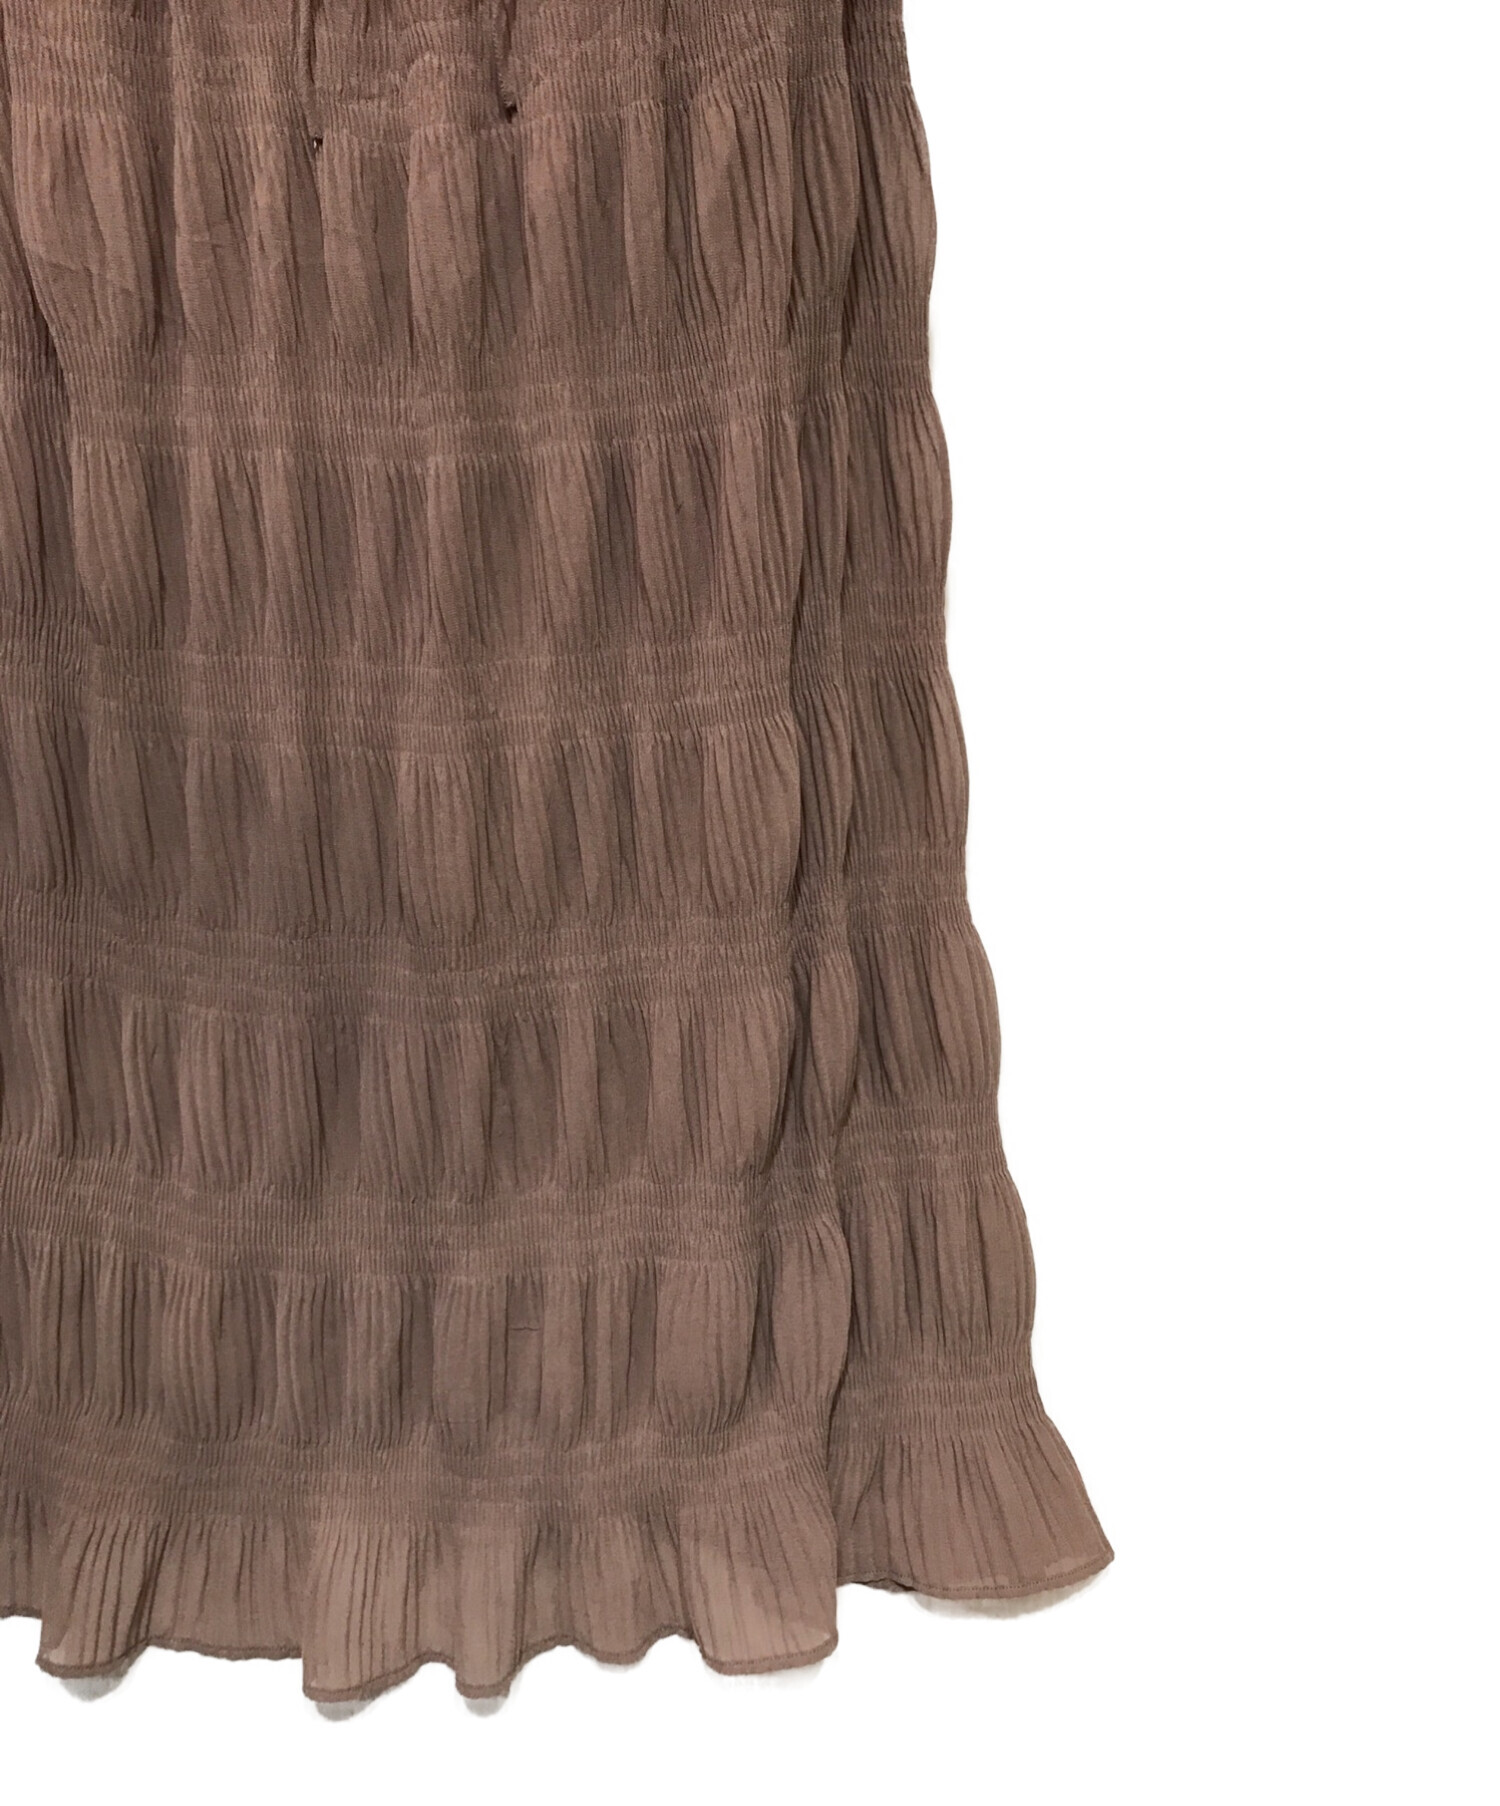 Her lip to Pleated Long Dress  brown-sColo